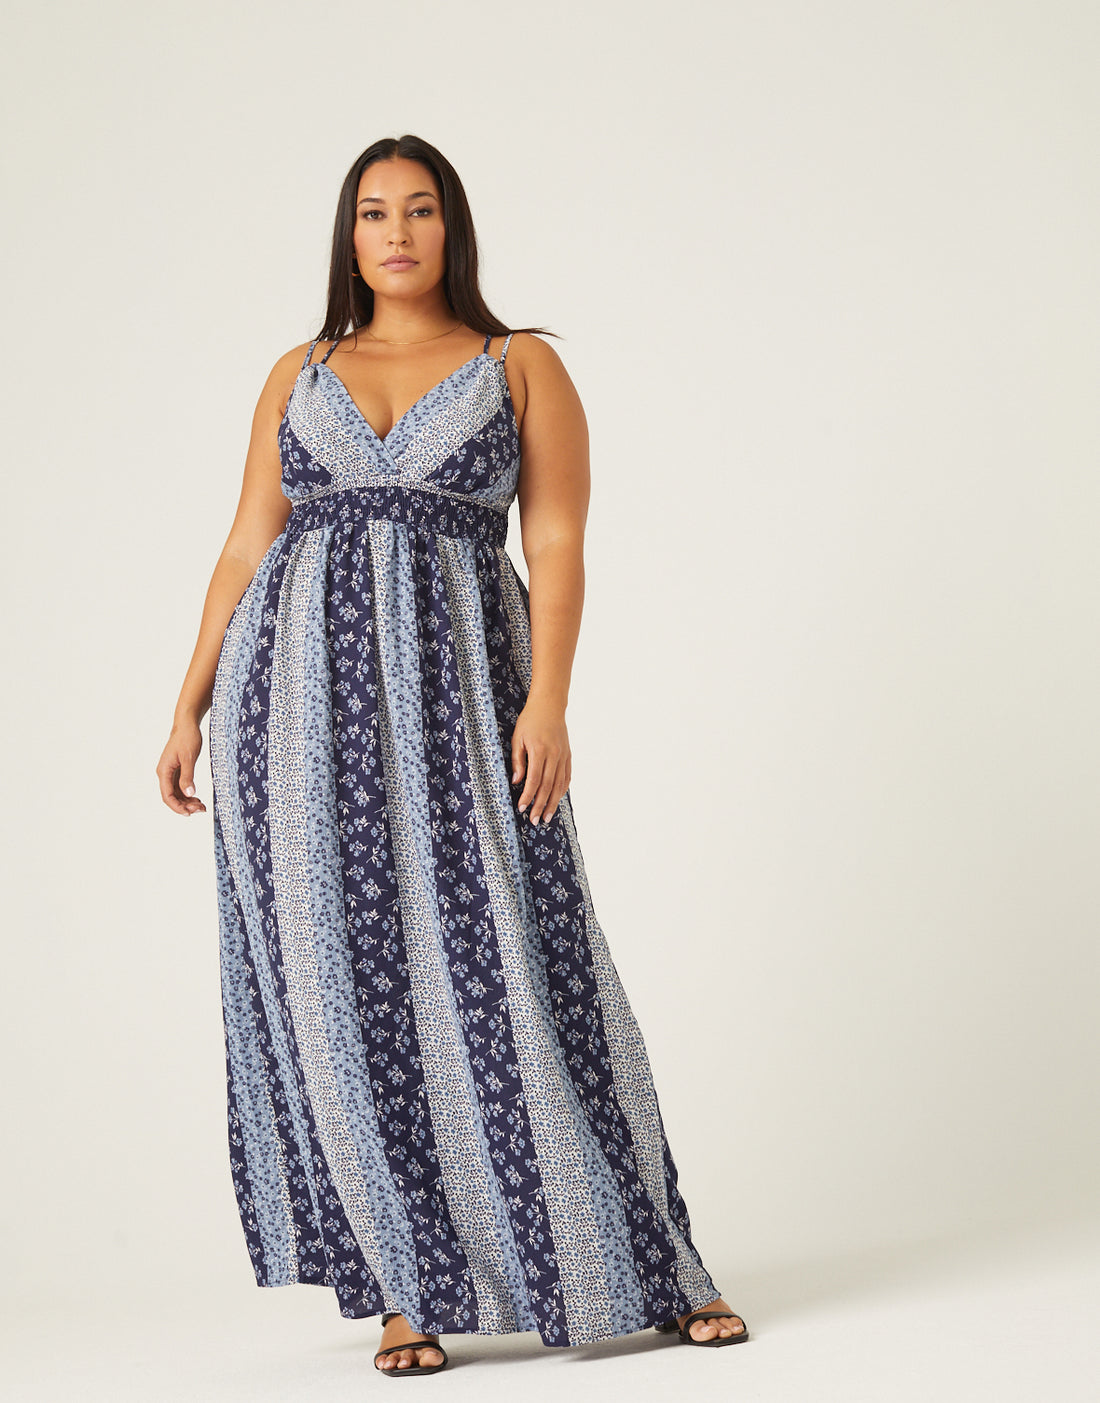 Discover more than 151 plus size one piece gown super hot